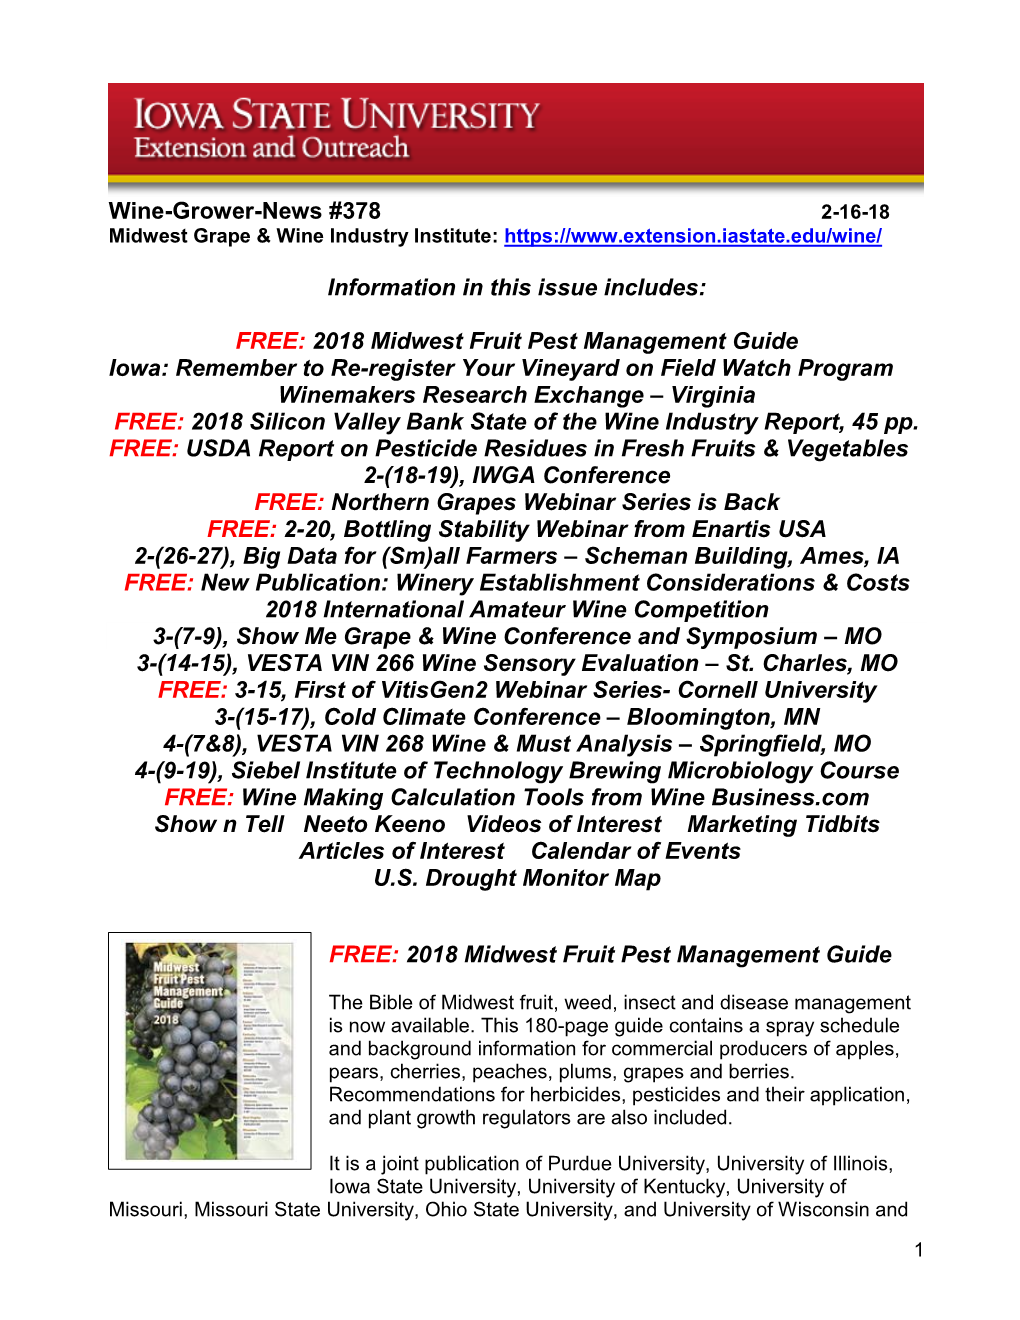 Wine-Grower-News #378 Information in This Issue Includes: FREE: 2018